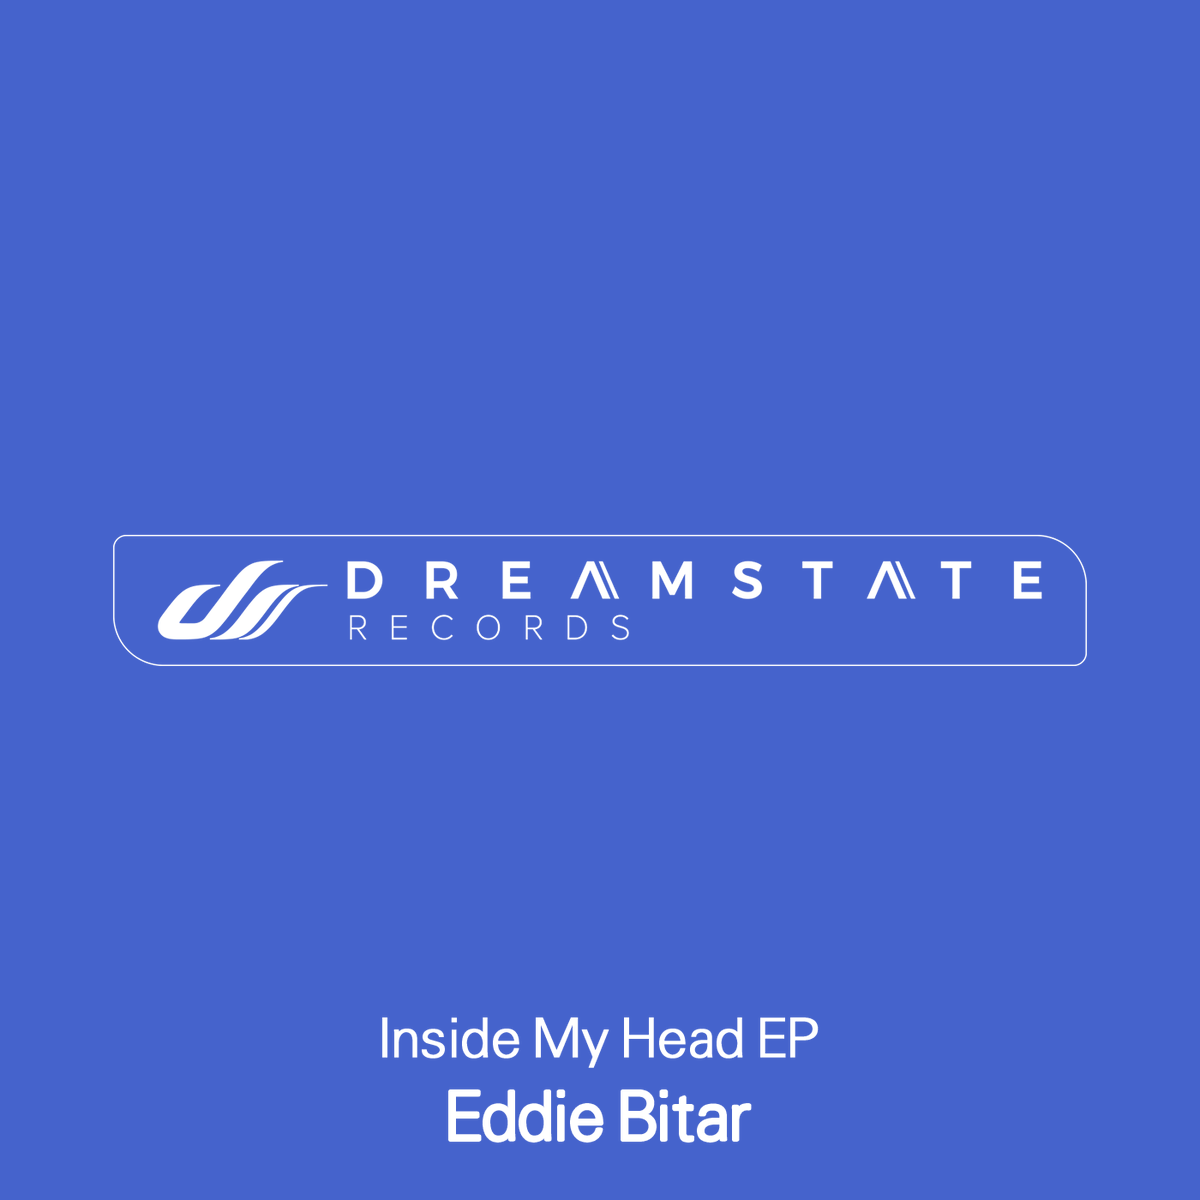 #DreamstateRecords returns with @EddieBitar's 'Inside My Head EP,' featuring enticing sounds of Trance, Psytrance & a touch of techno.🌬⚡️ Don't sleep on this one, Dreamers!☁️ → drmst.cc/InsideMyHeadEP